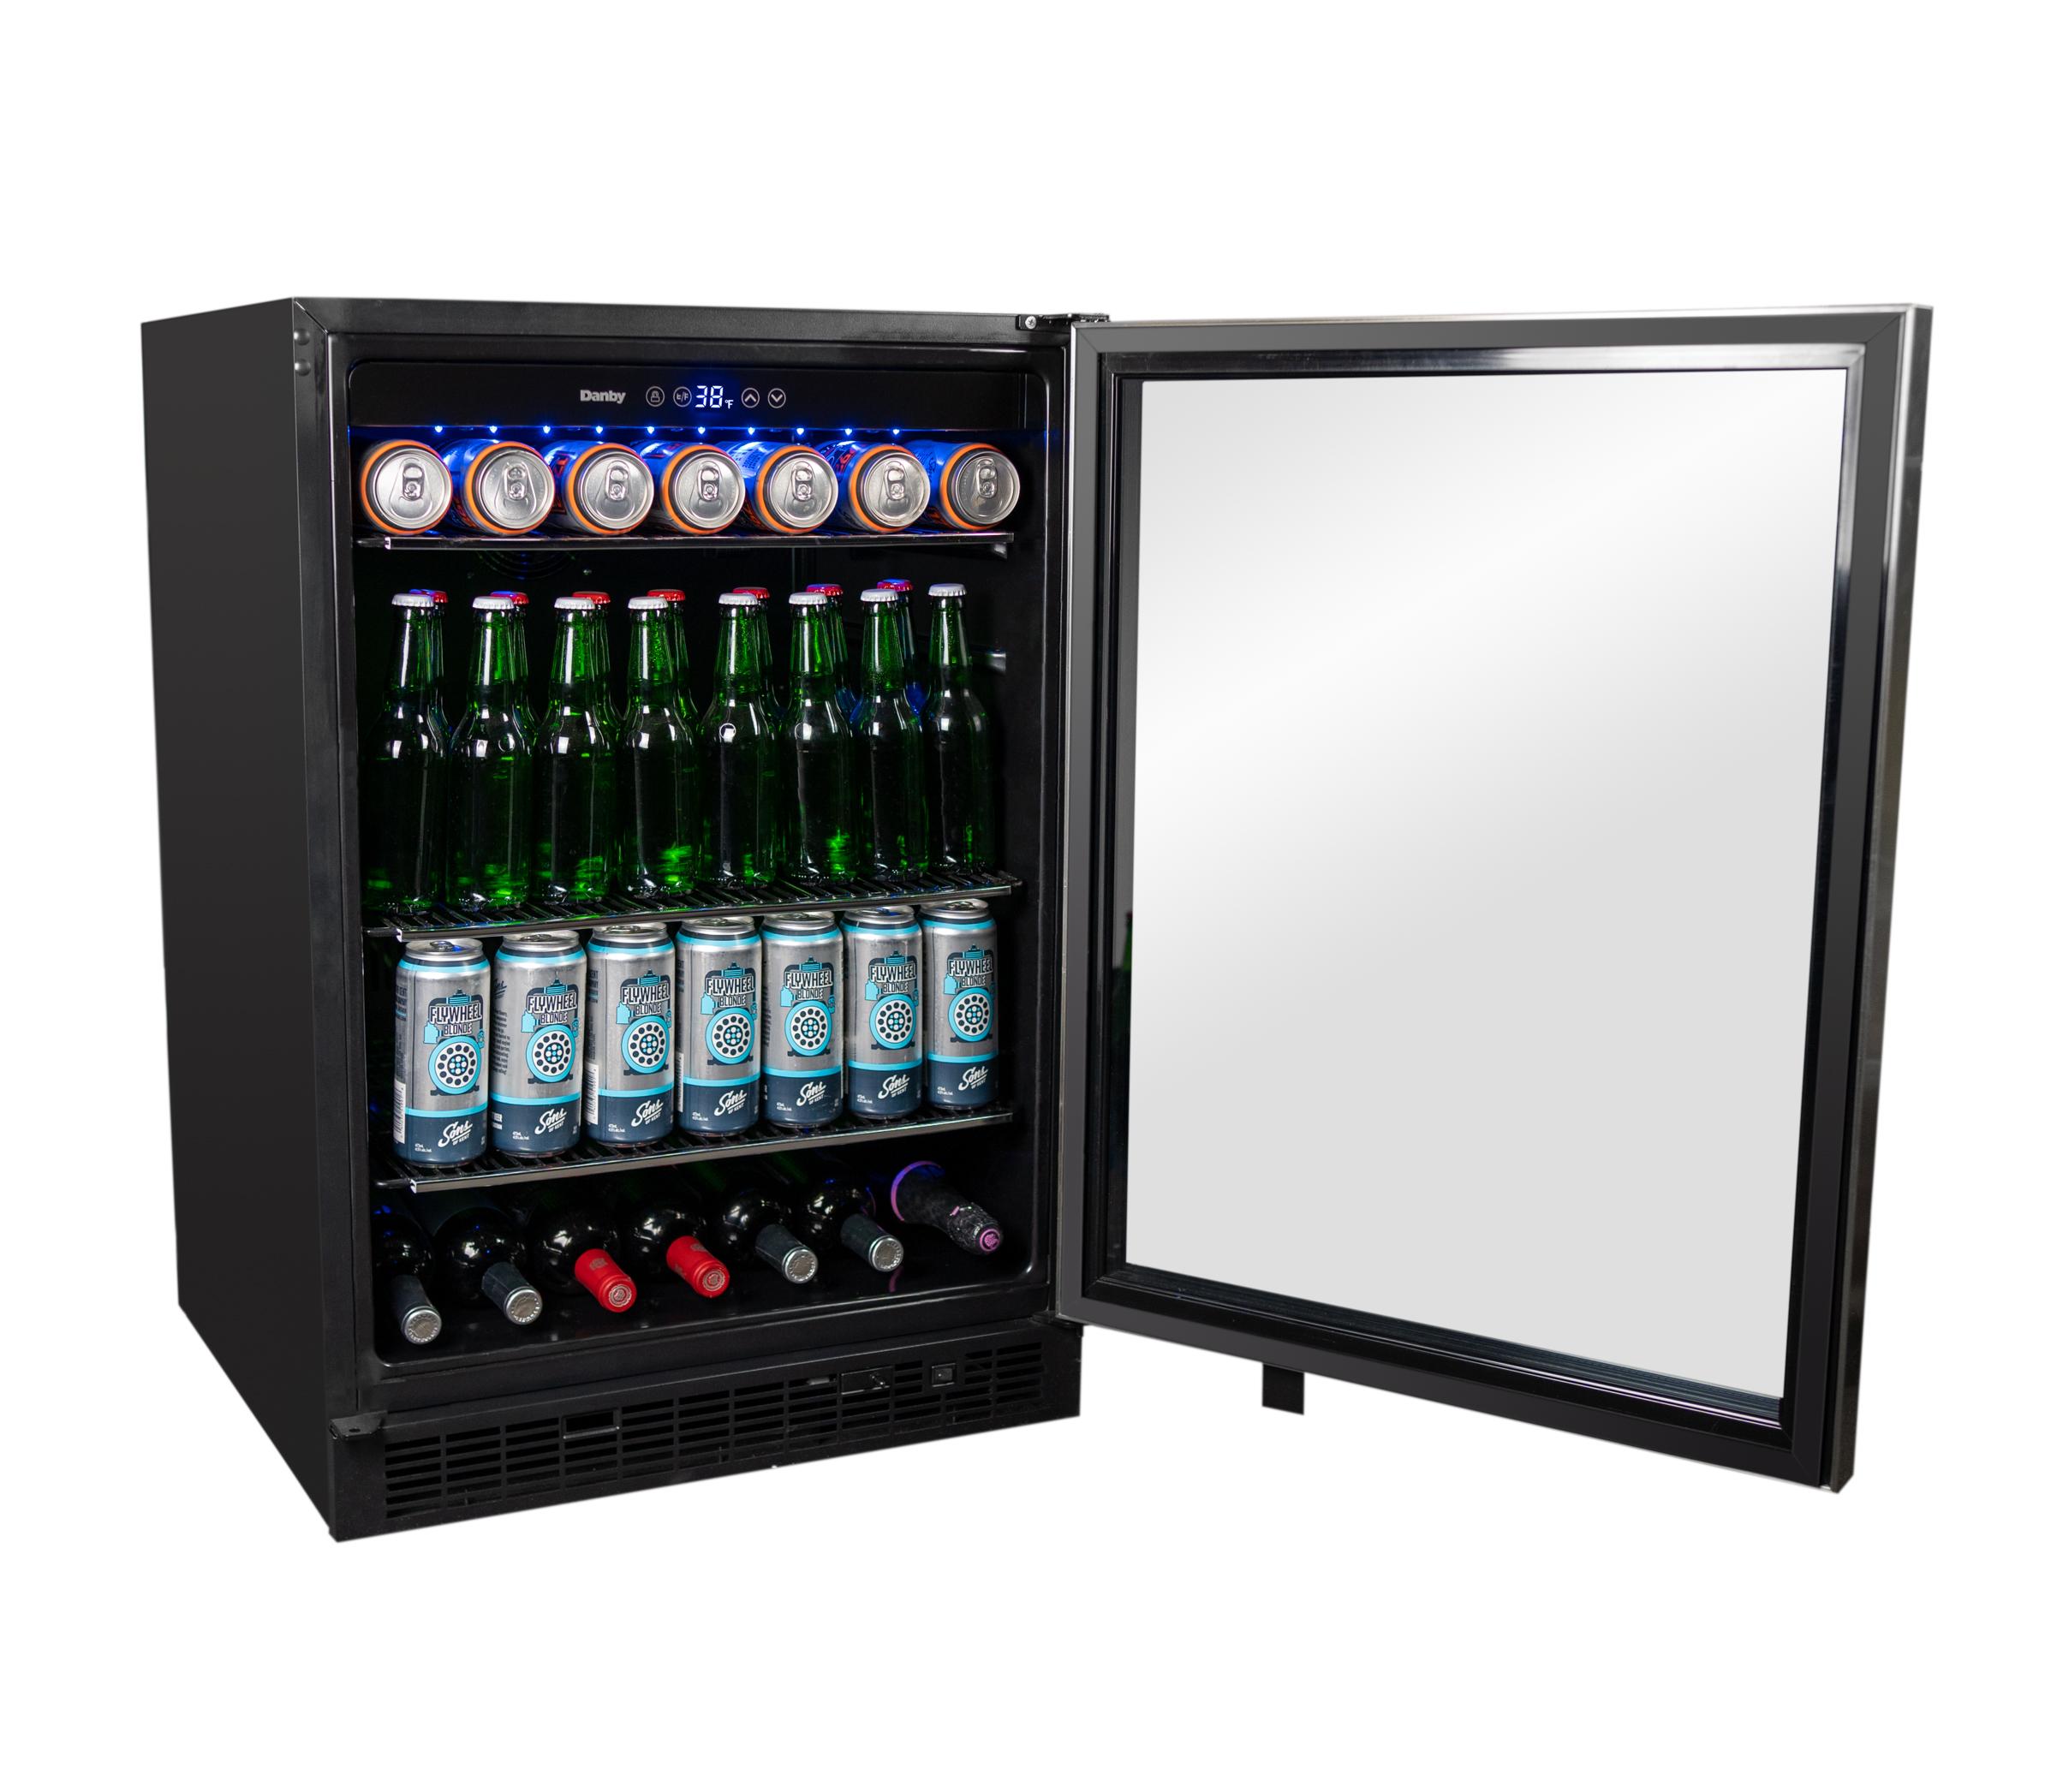 Danby 5.7 cu. ft. Built-in Beverage Center in Stainless Steel